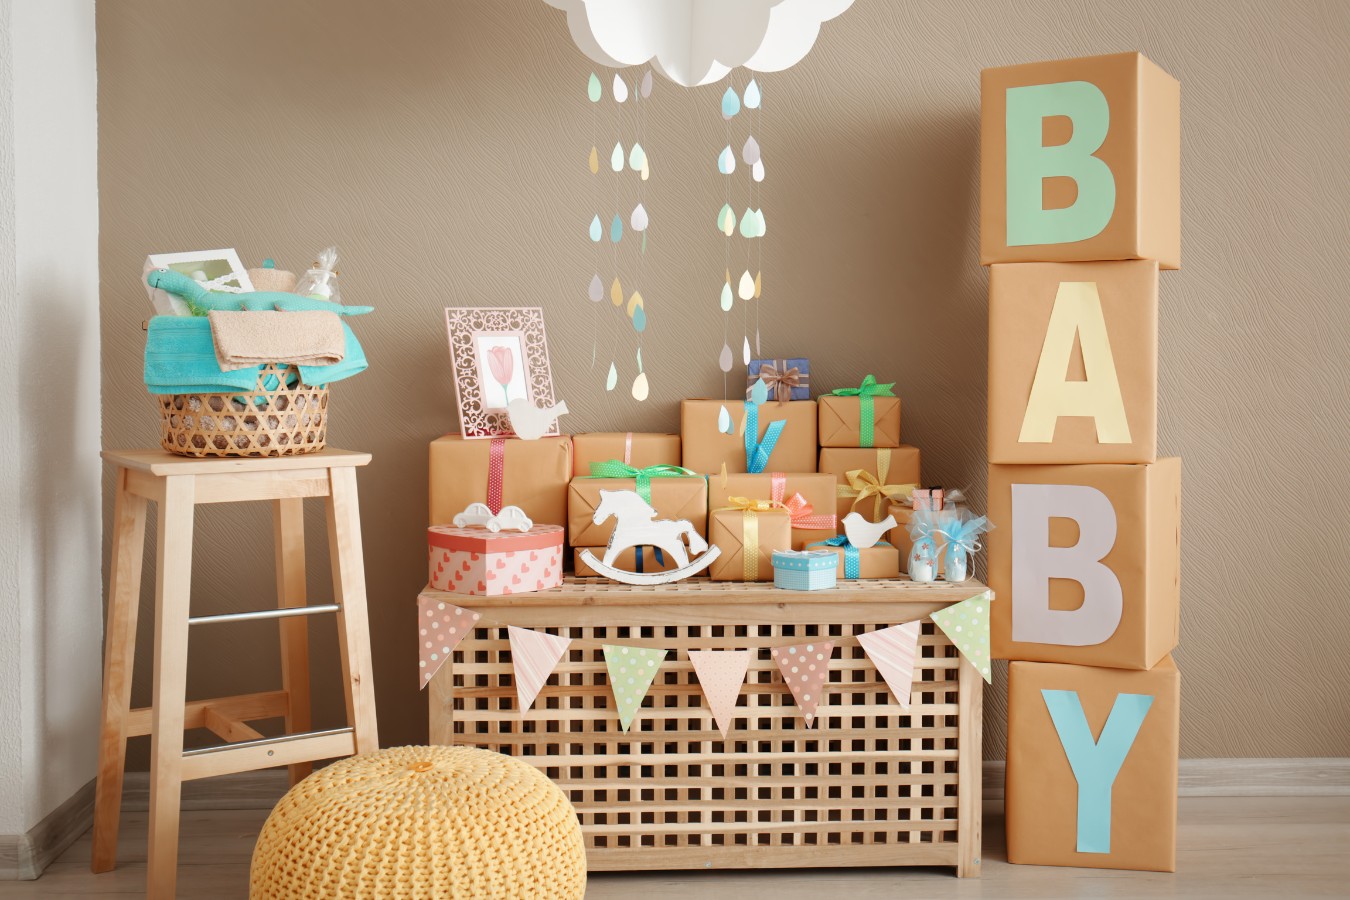 Baby Shower Planning Tips: How to Create a Memorable Celebration